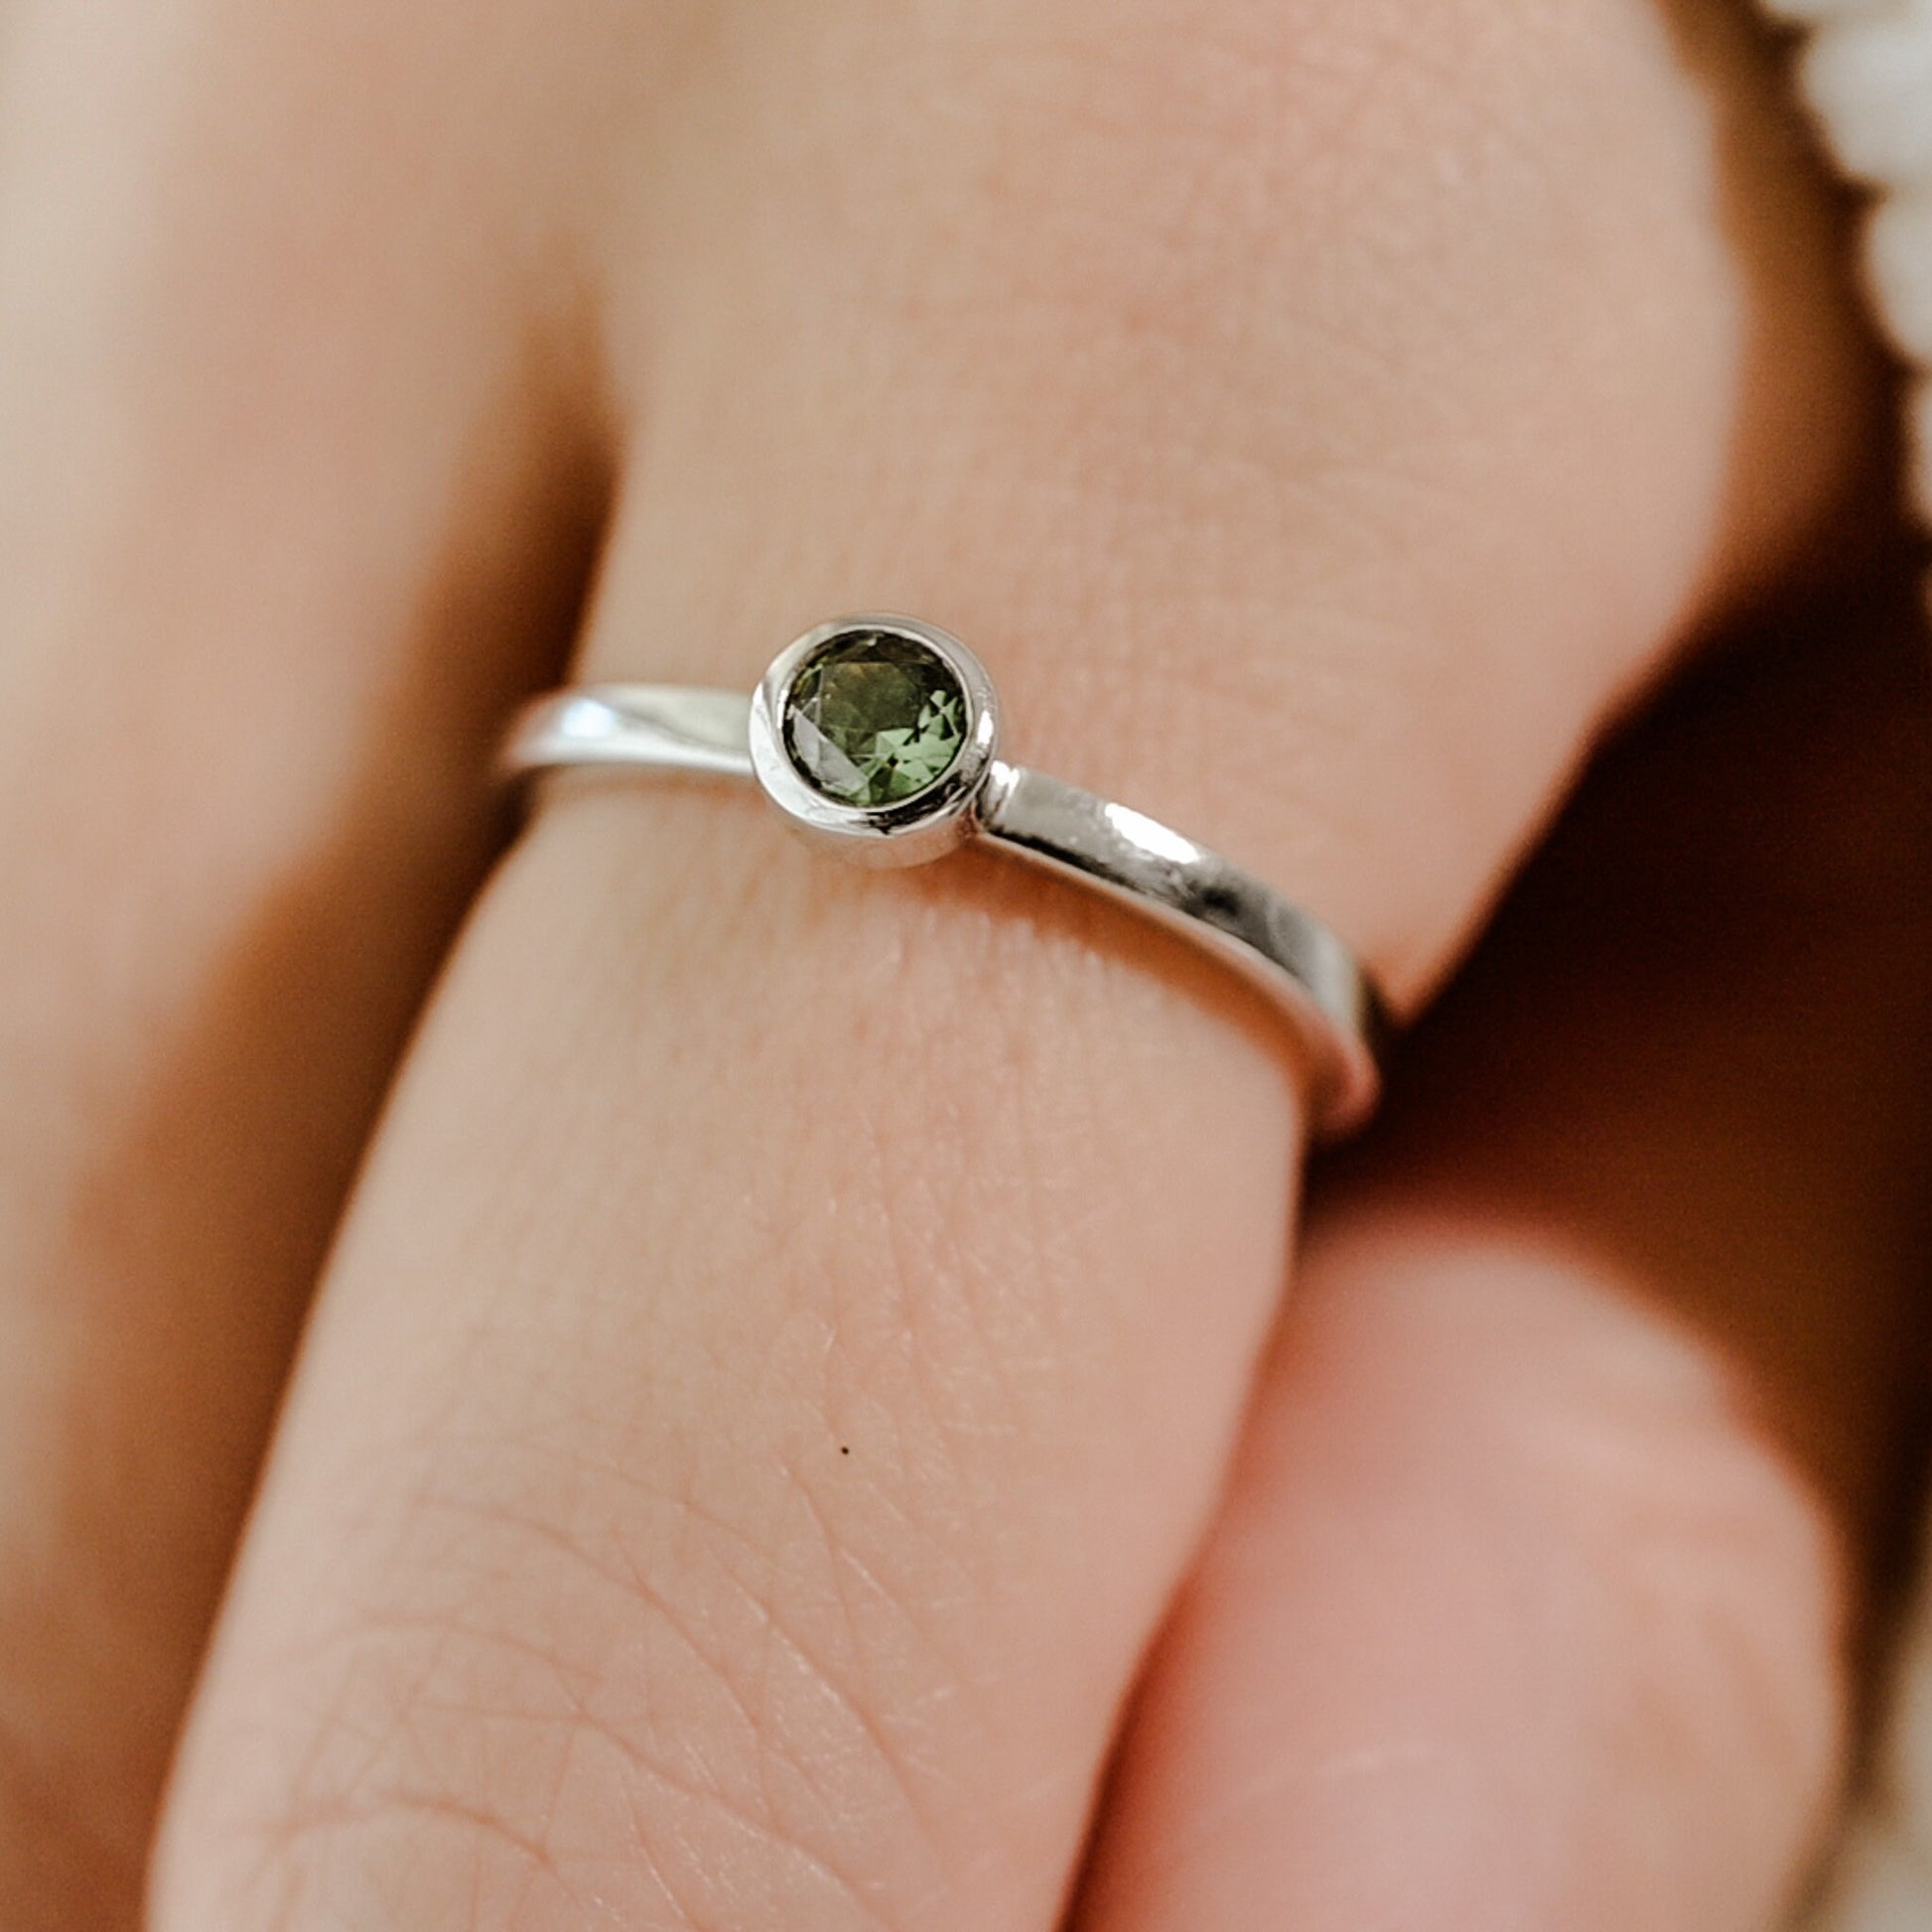 Peridot Birthstone Stone Ring Solid Silver, Solitaire Bezel Set, Ethical Gemstones